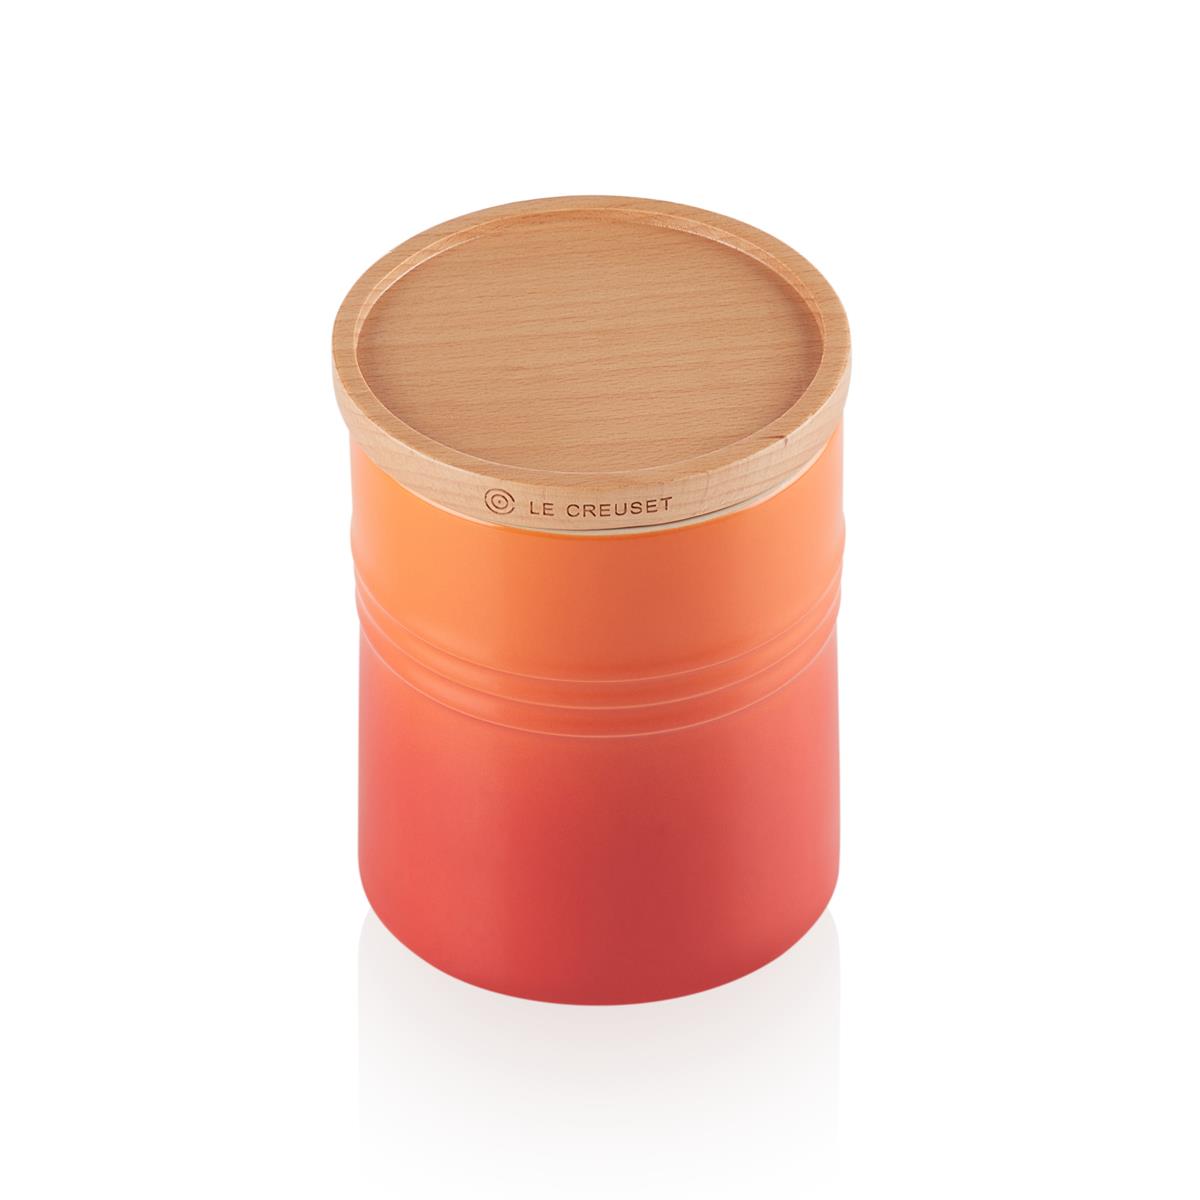 What is the purpose of the Le Creuset storage jar?